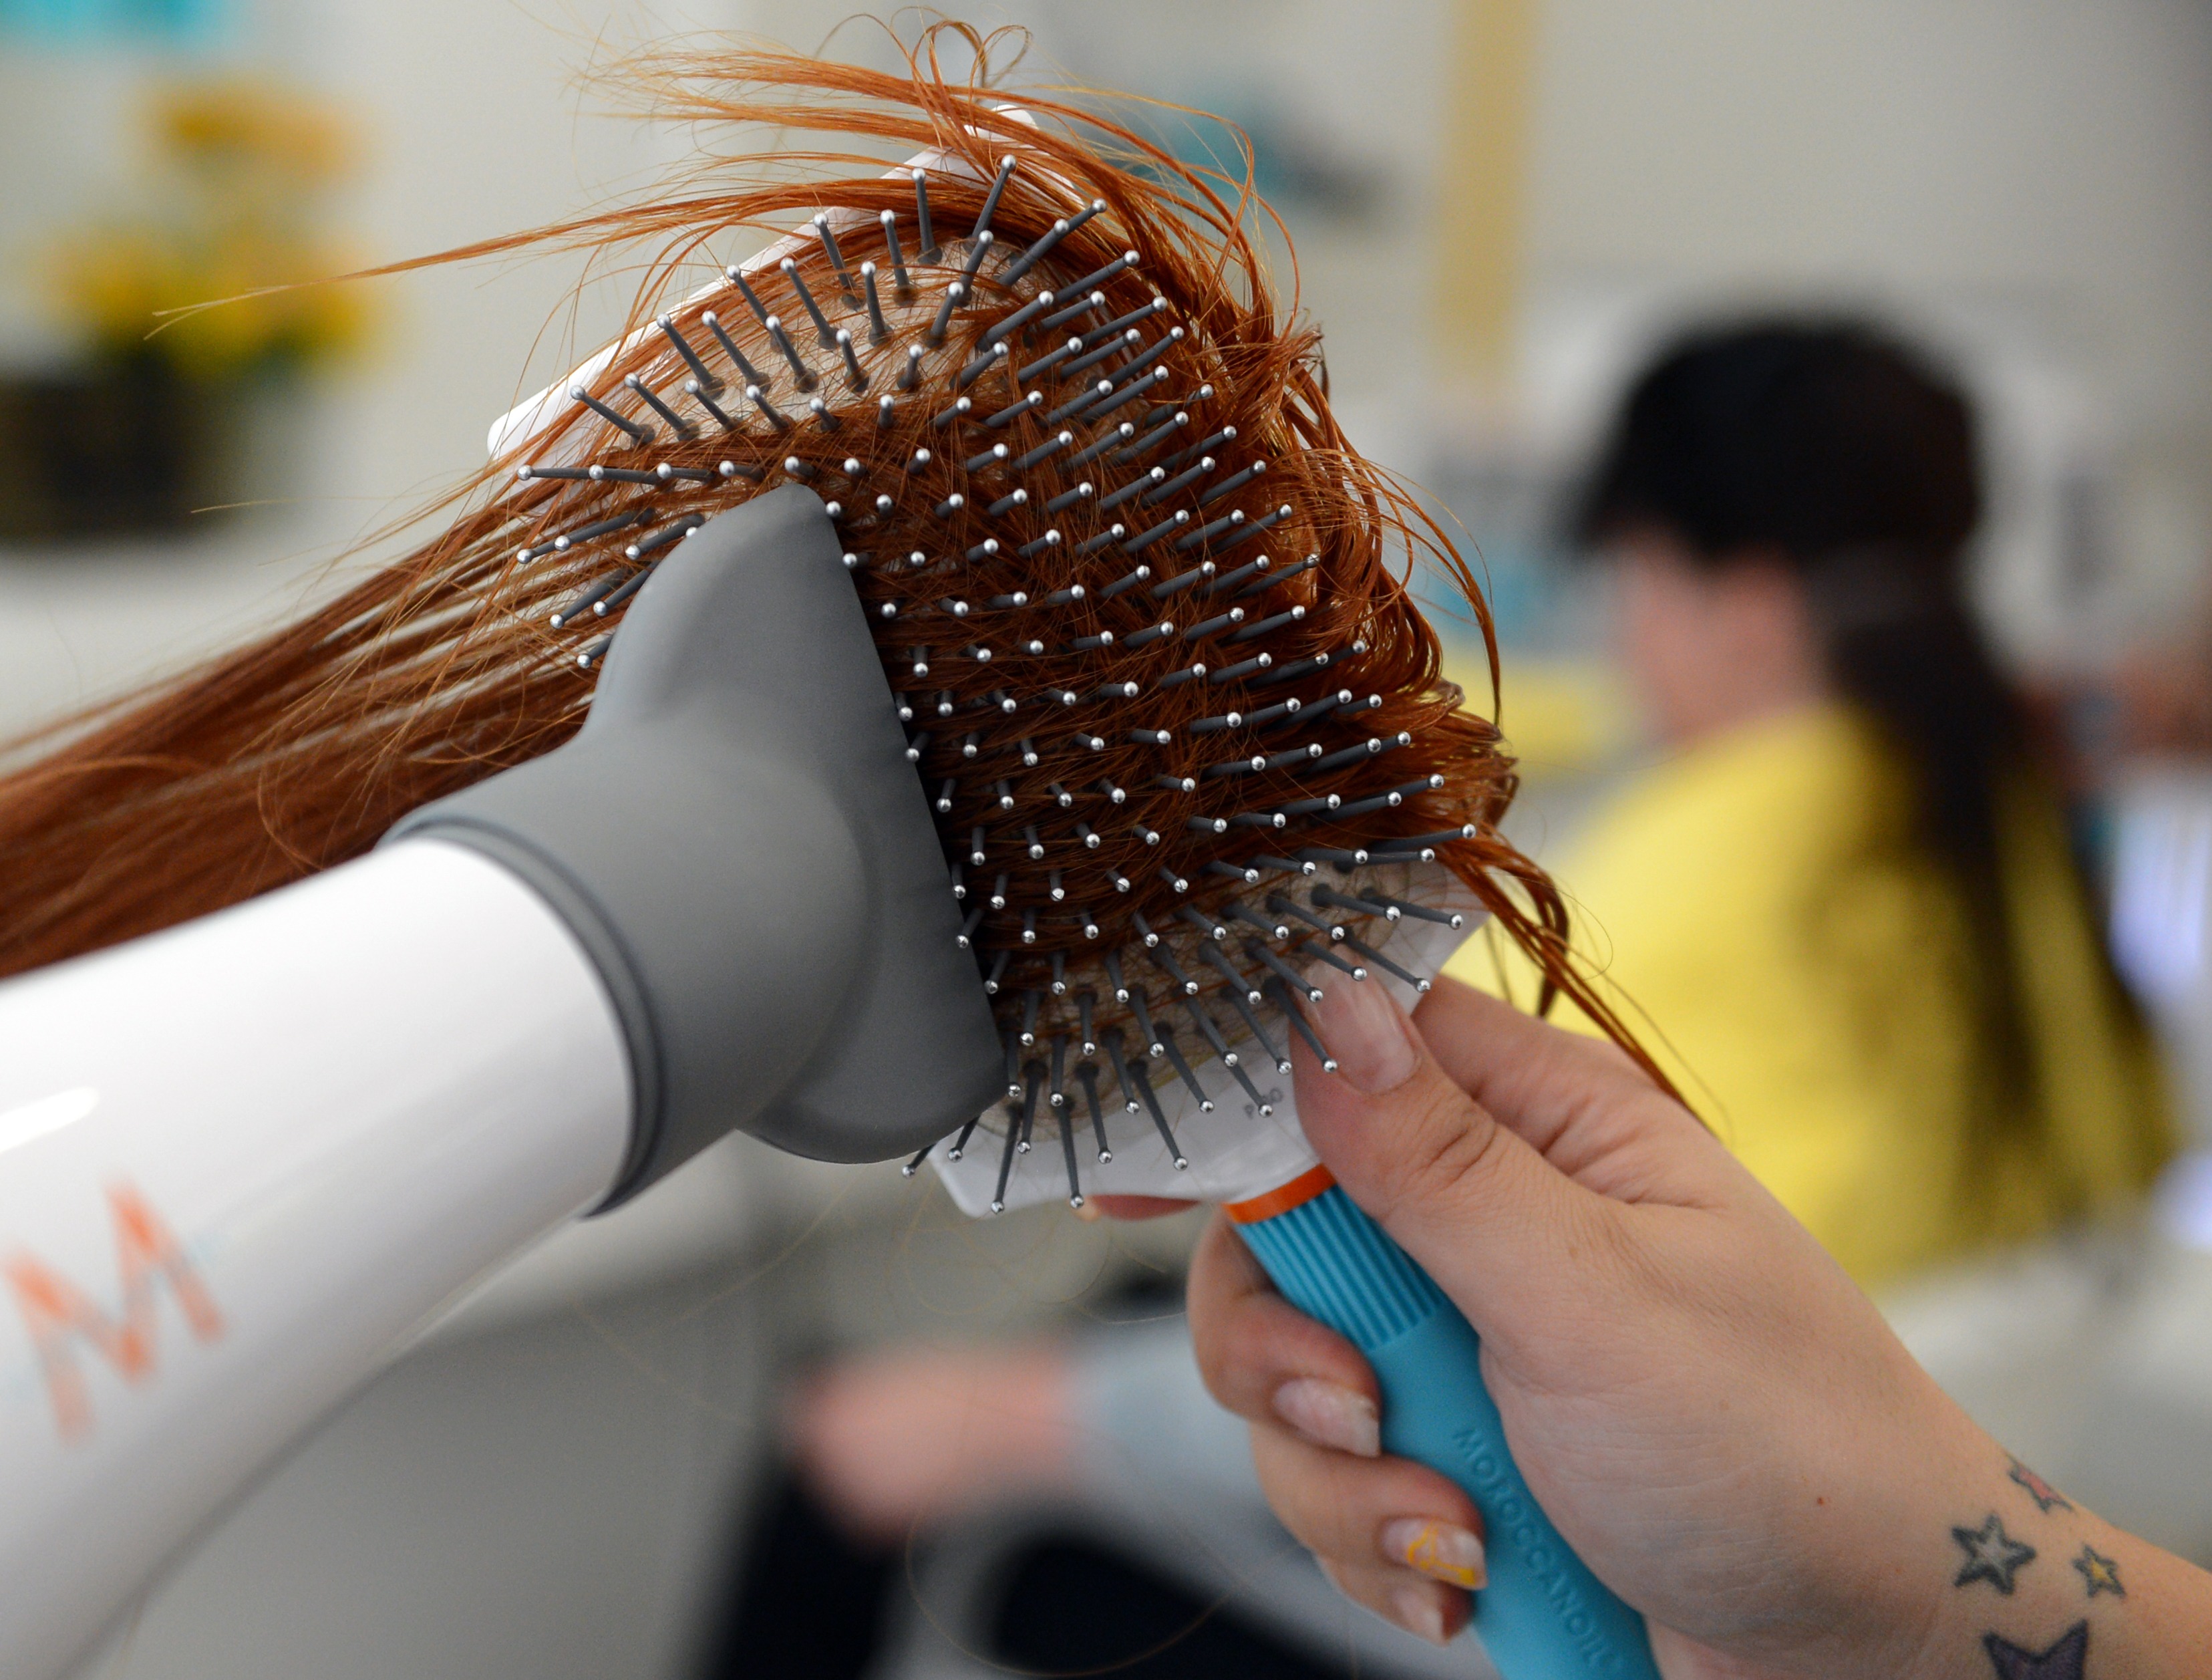 Should You Air Dry Your Hair? The Right Answer Might Surprise You